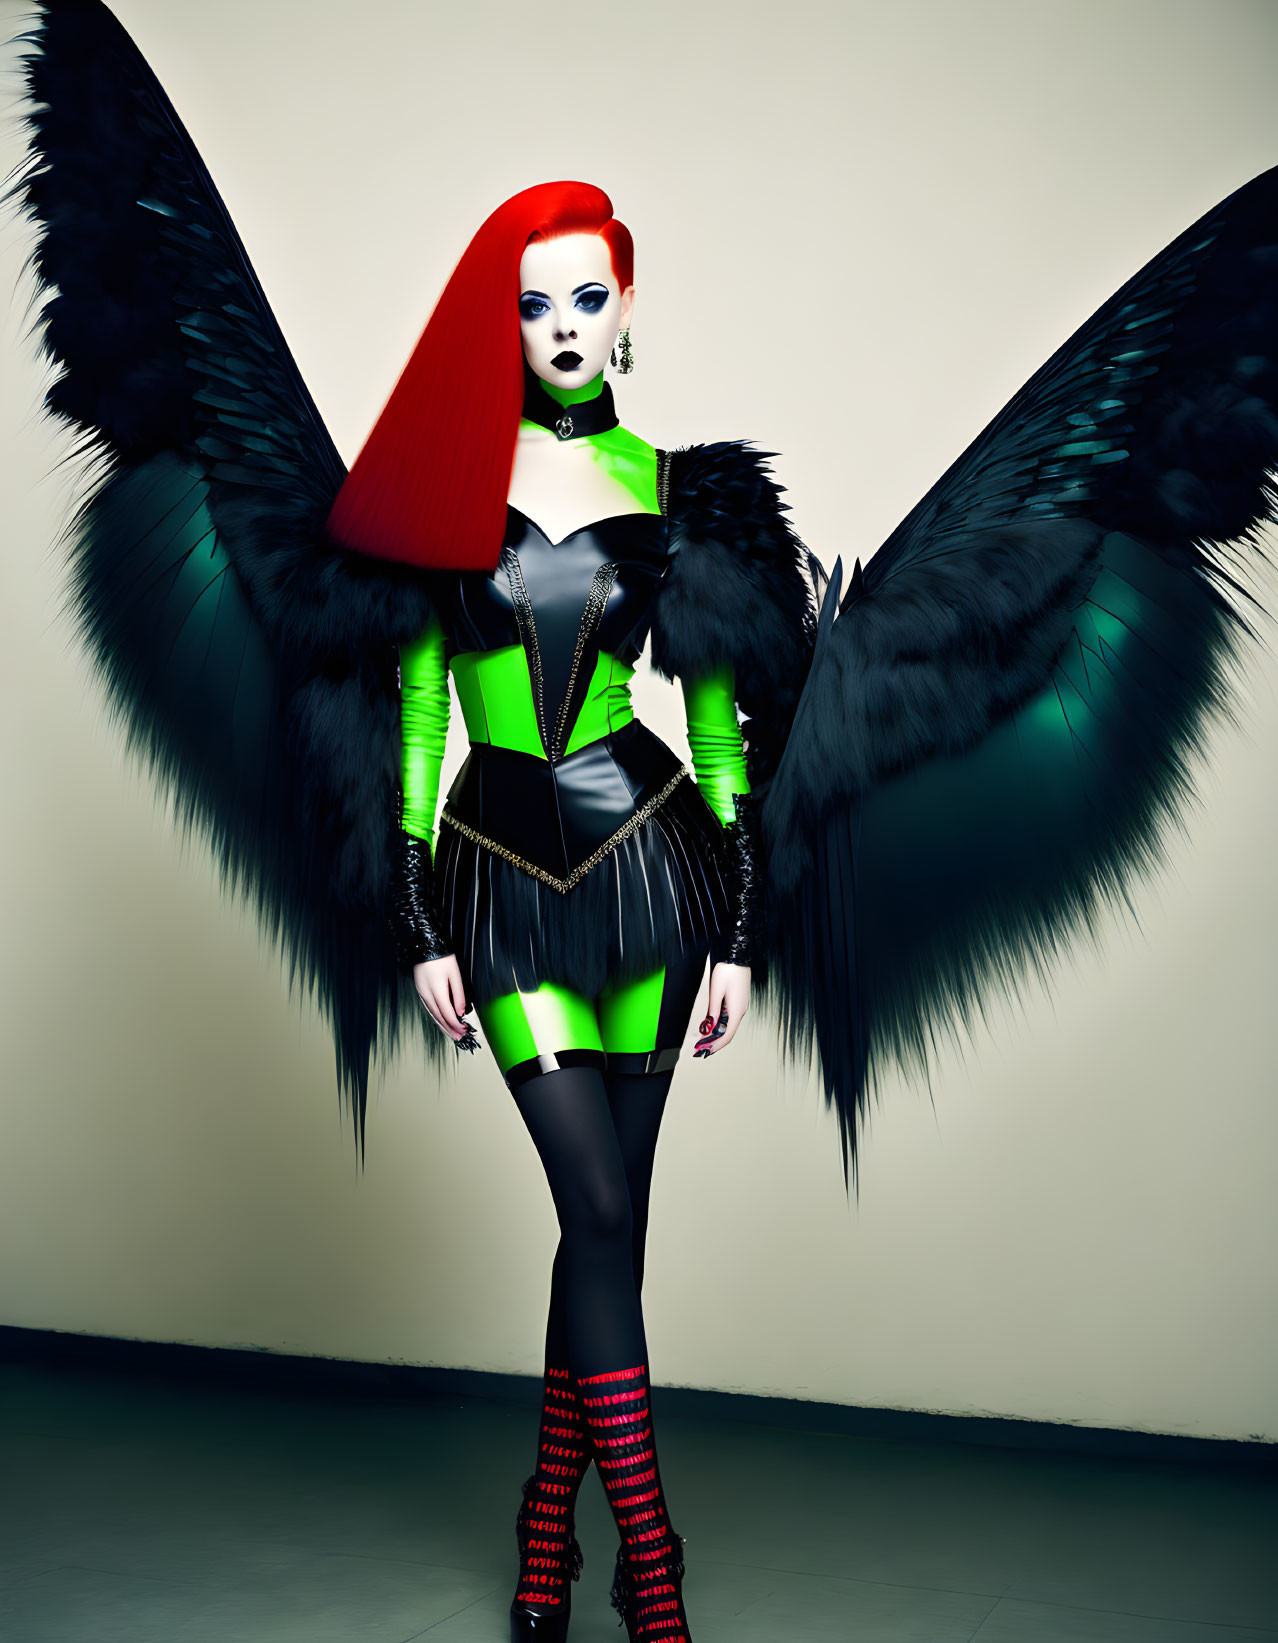 Red-haired figure in black wings and dramatic makeup against pale backdrop